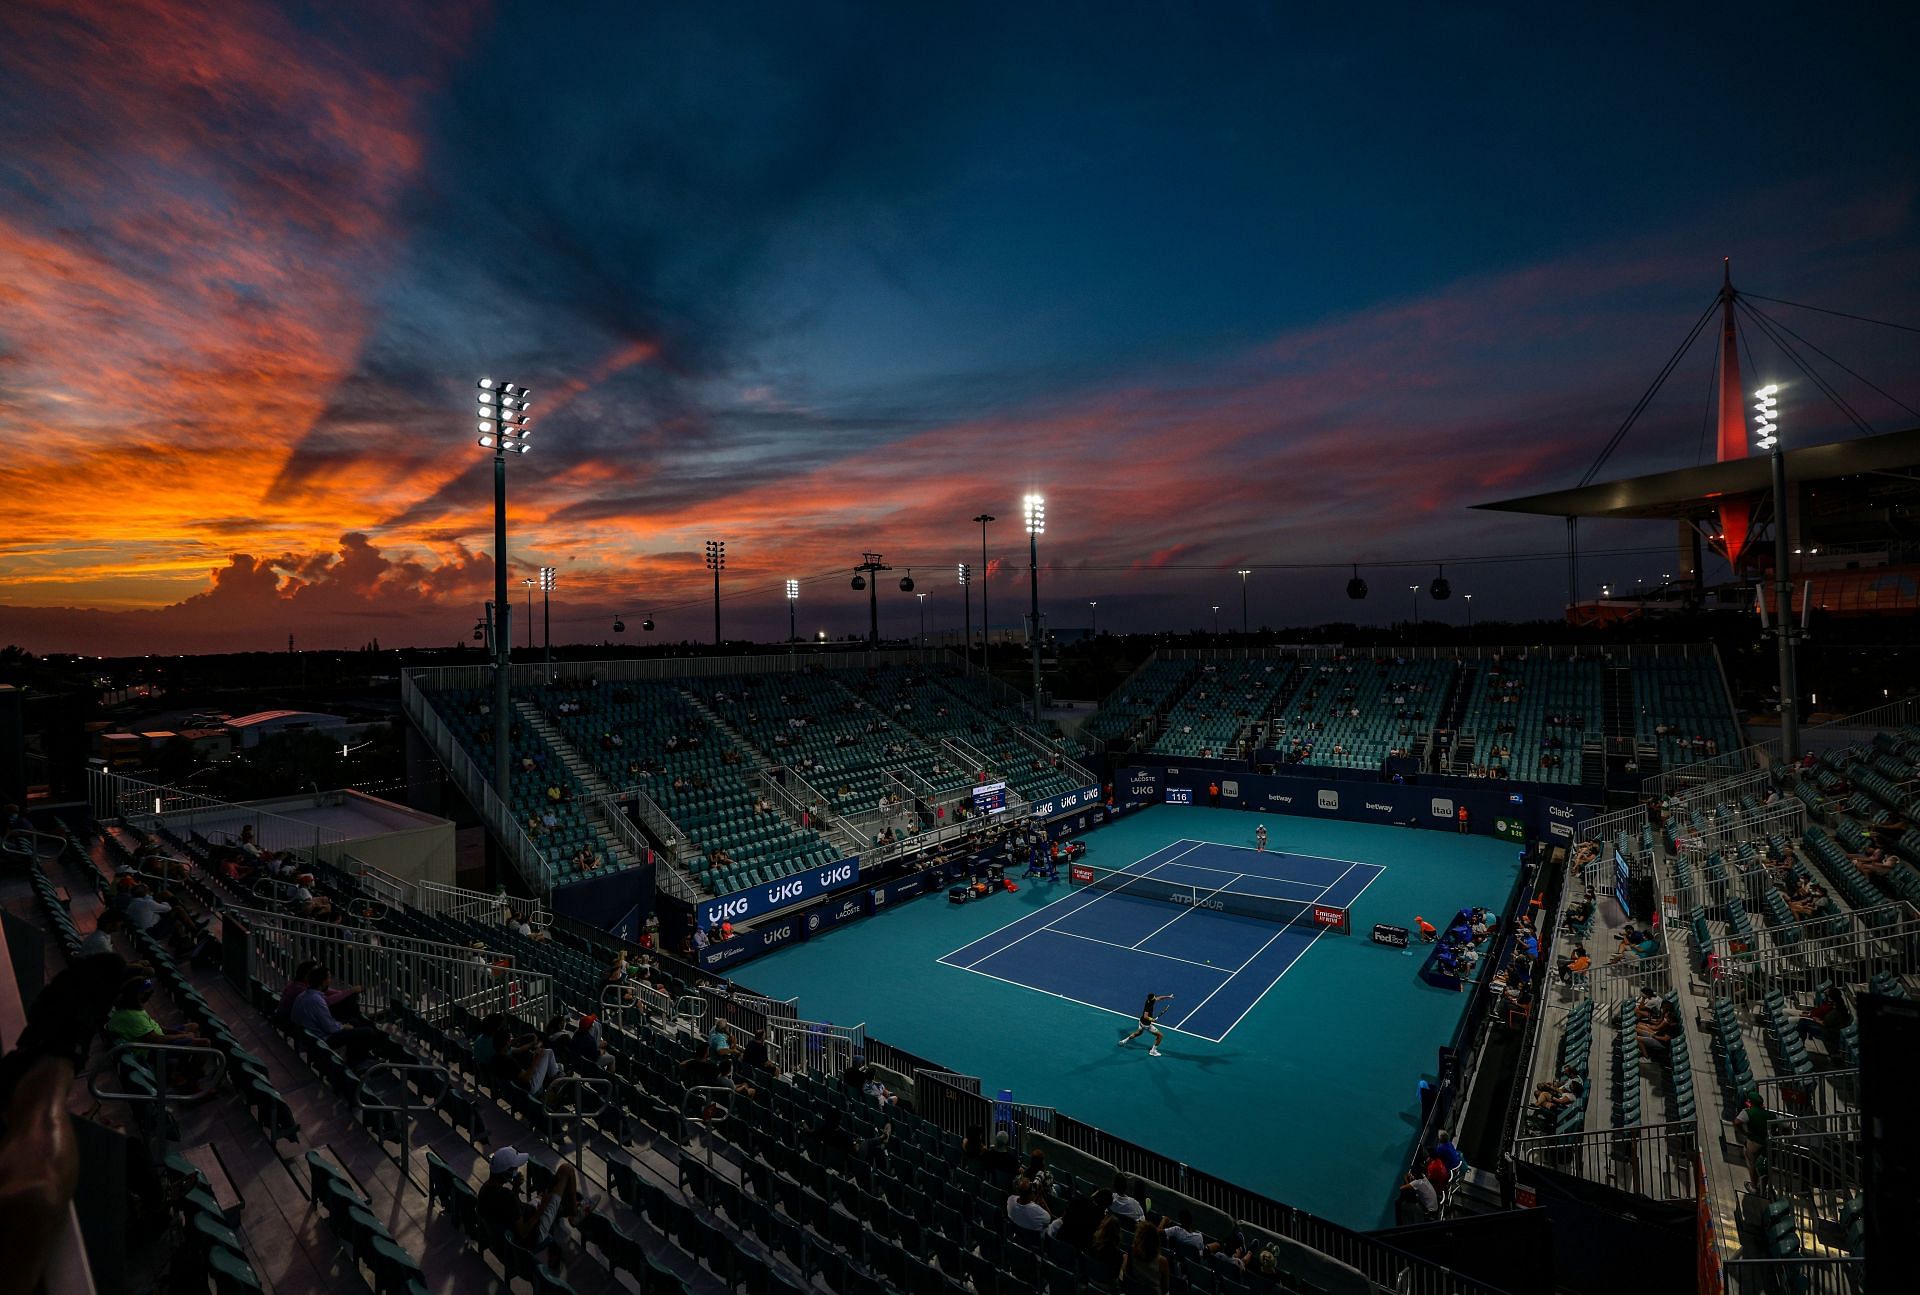 The Hard Rock Stadium in Miami Gardens, Florida, has hosted the Miami Open since 2019.